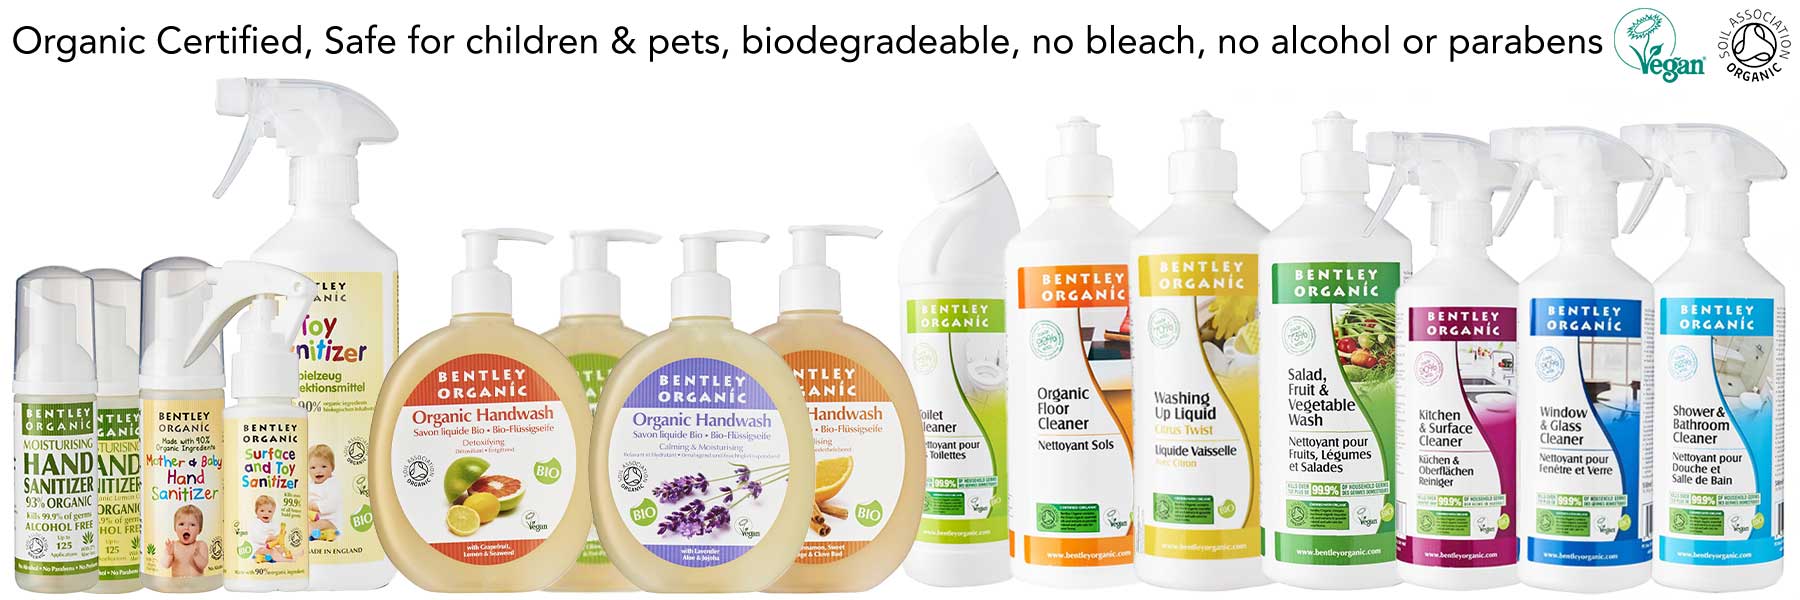 Bentley Organic Sanitisers and Home Cleaners - Safe for Babies and Pets No Alcohol, Bleach, Parabens, SLS/SLES, Vegan